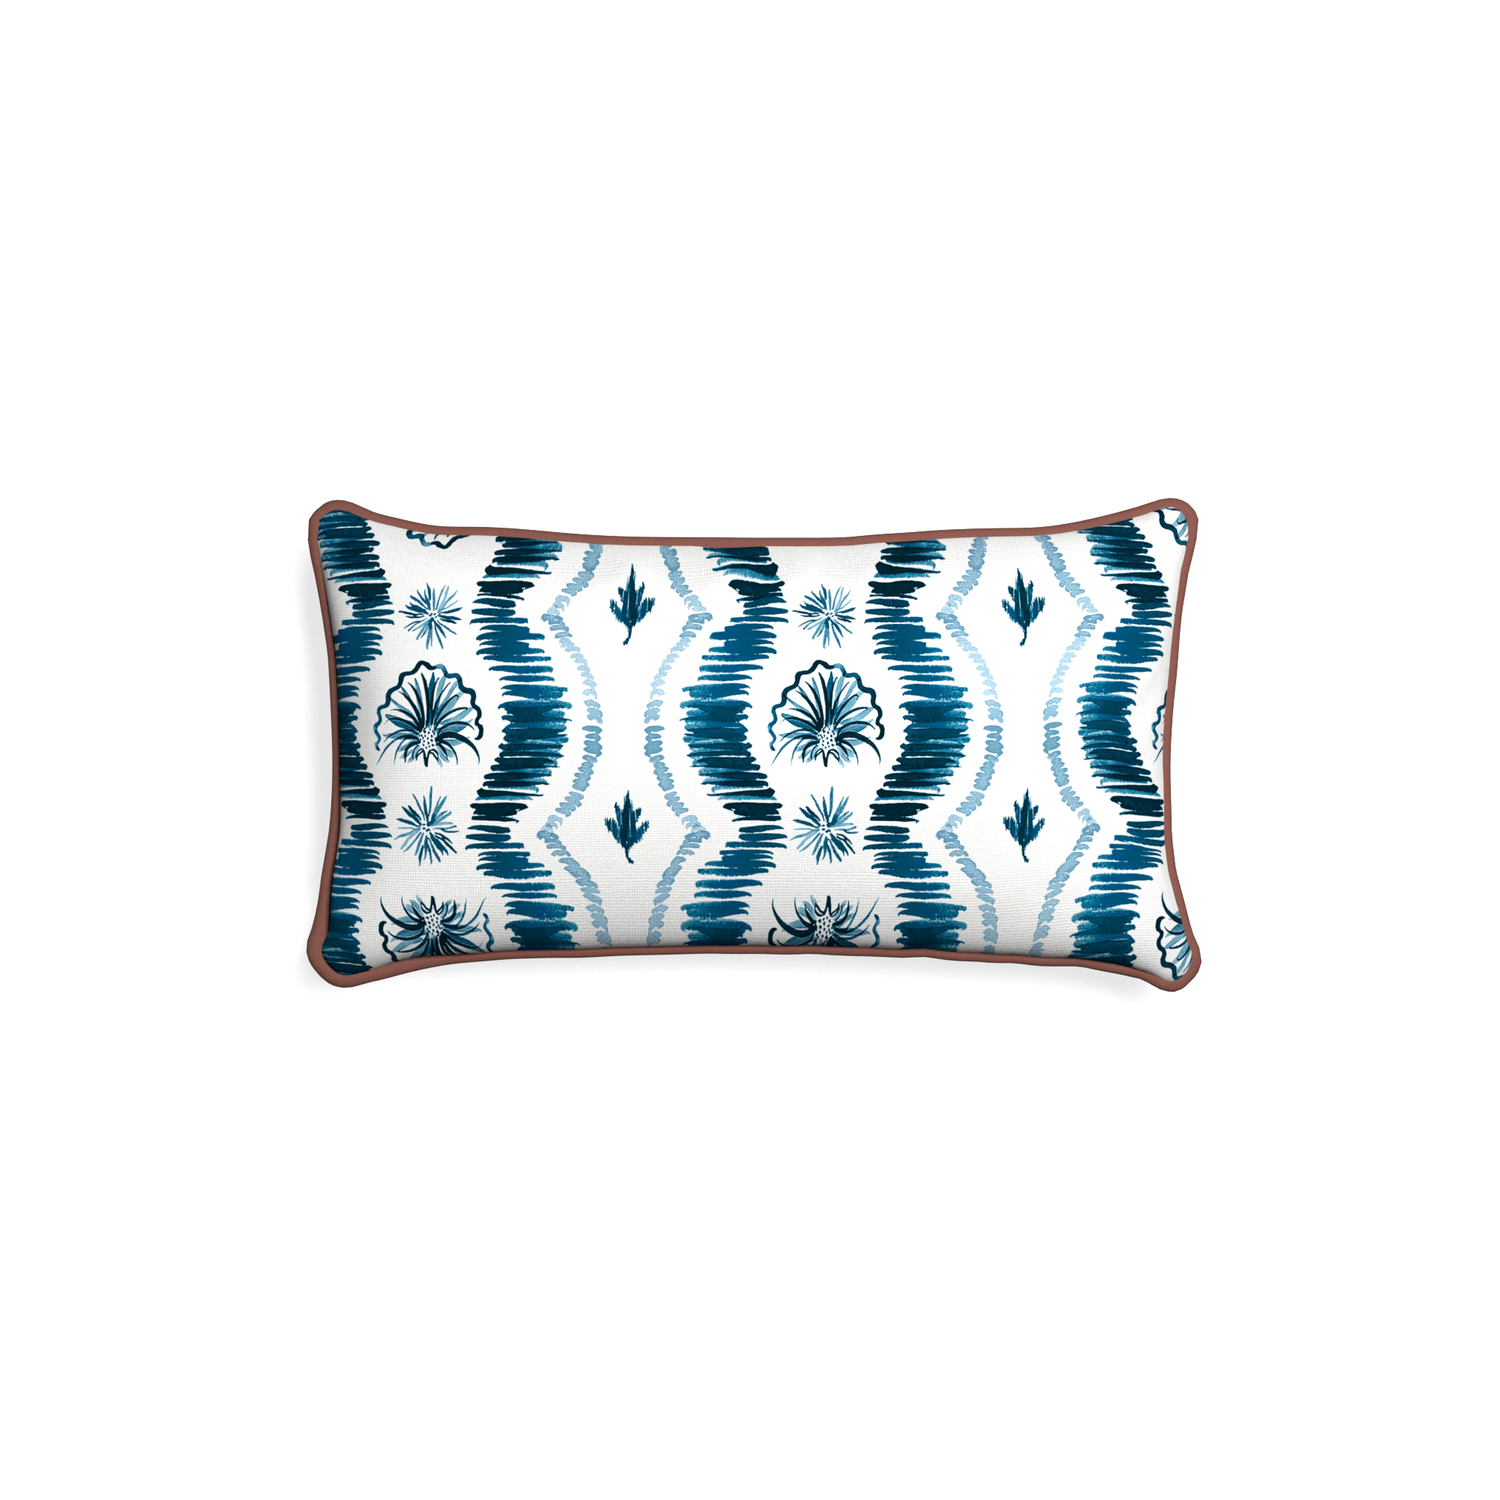 Petite-lumbar alice custom blue ikatpillow with w piping on white background